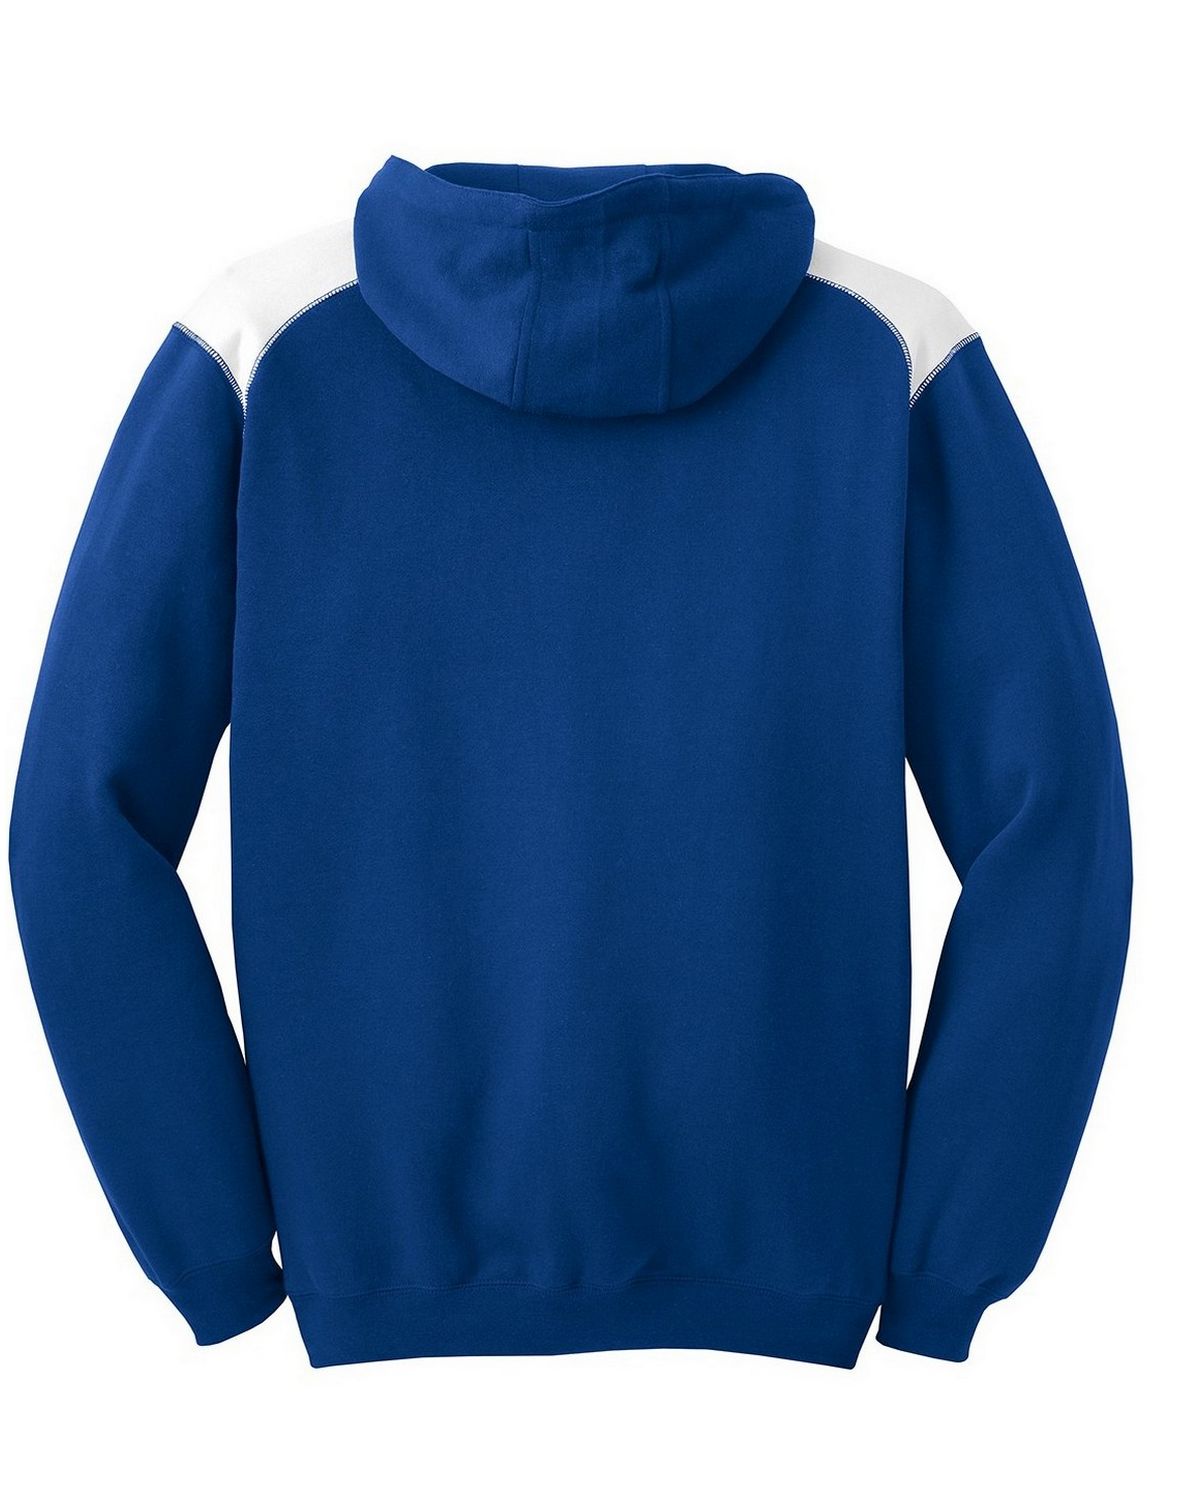 Sport-Tek F264 Pullover Hooded Sweatshirt with Contrast Color by Port ...